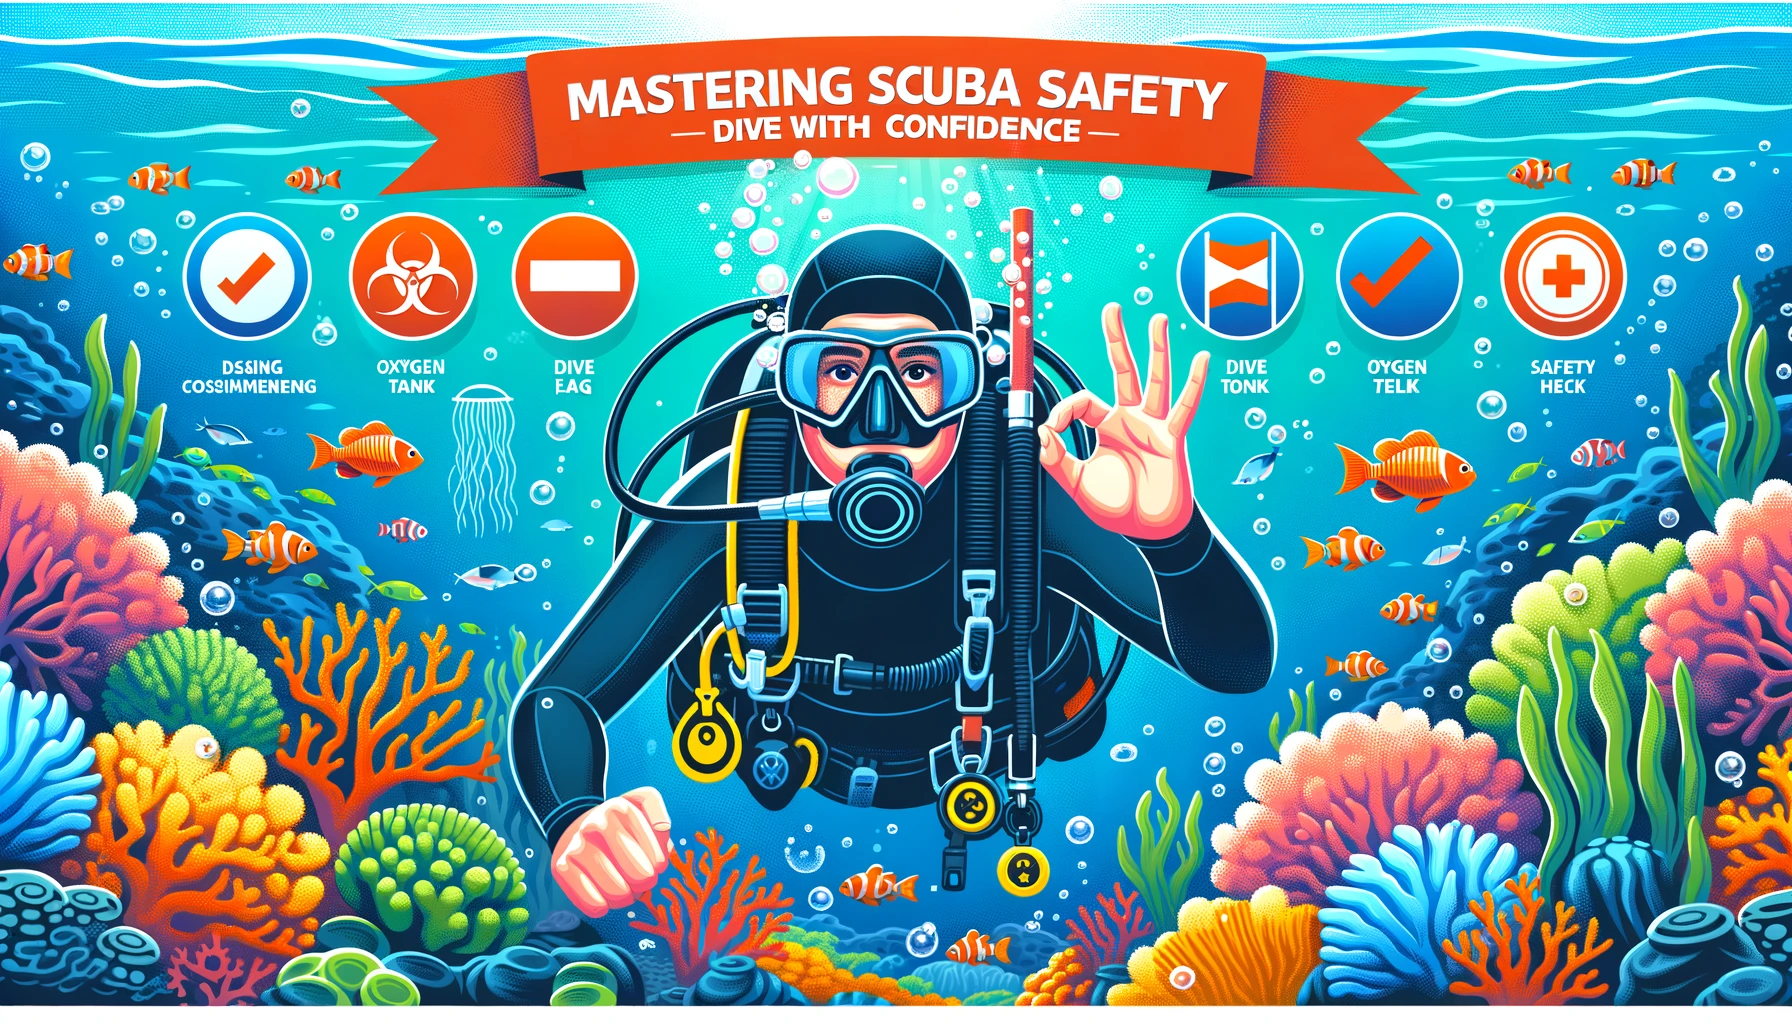 Mastering Scuba Safety: What Every Diver Should Know